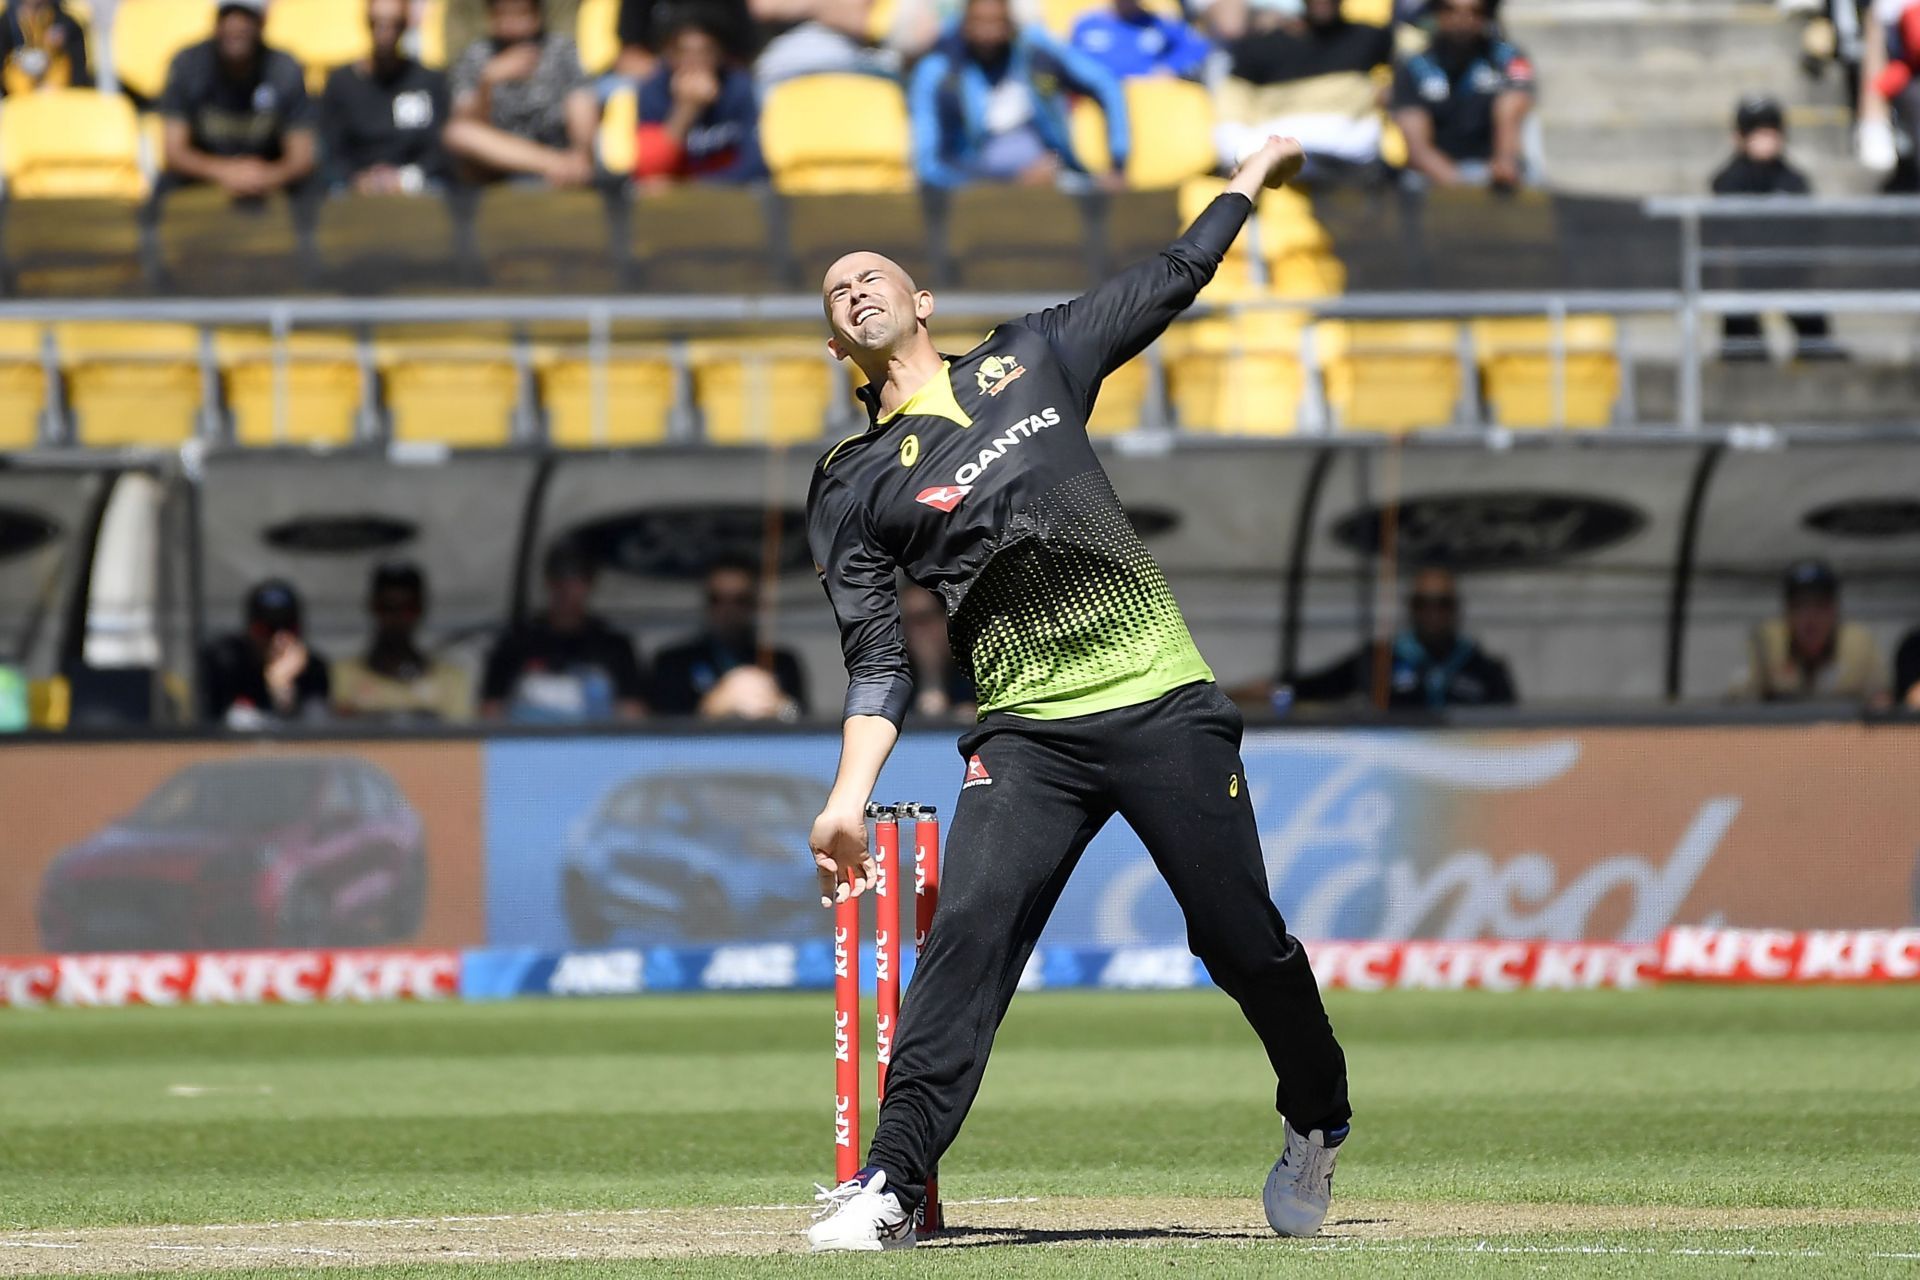 Should Ashton Agar feature in the playing XI for Australia against the Blackcaps in the final?